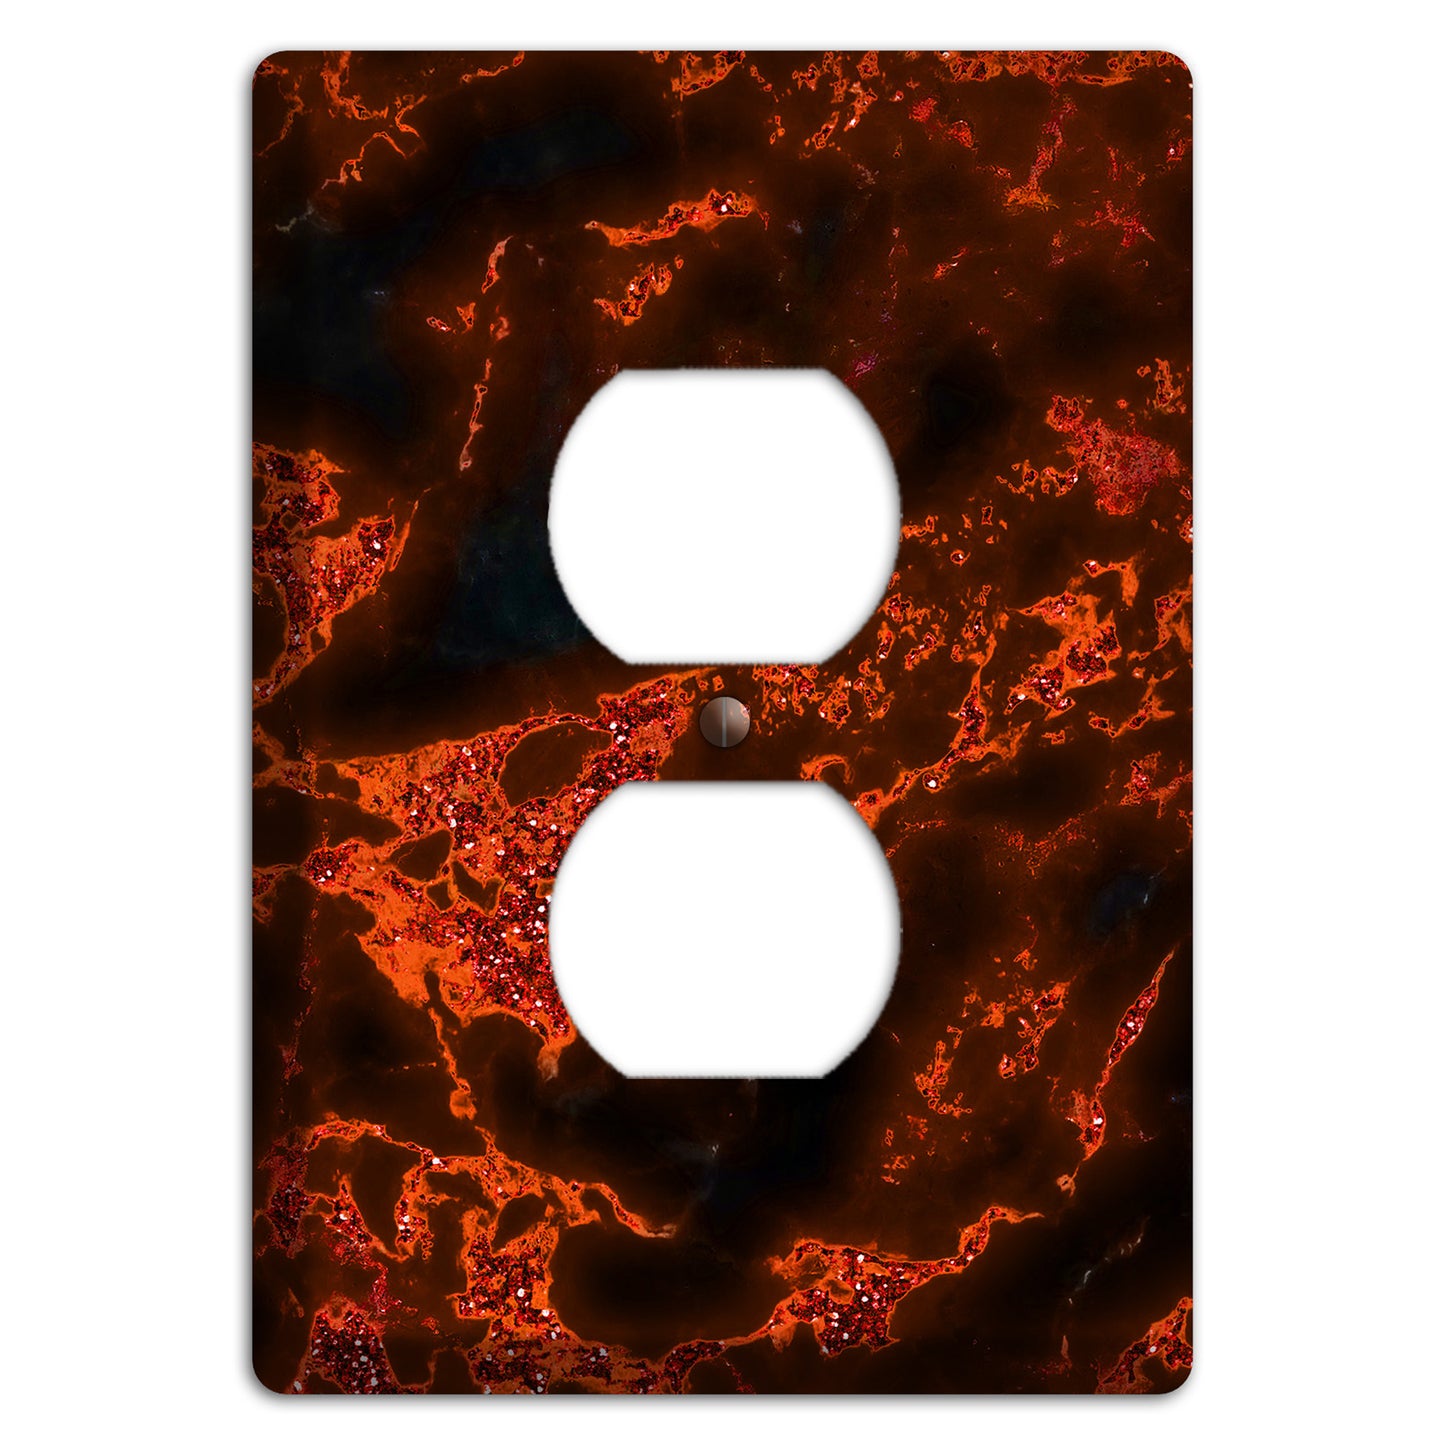 Black and Red Marble Duplex Outlet Wallplate